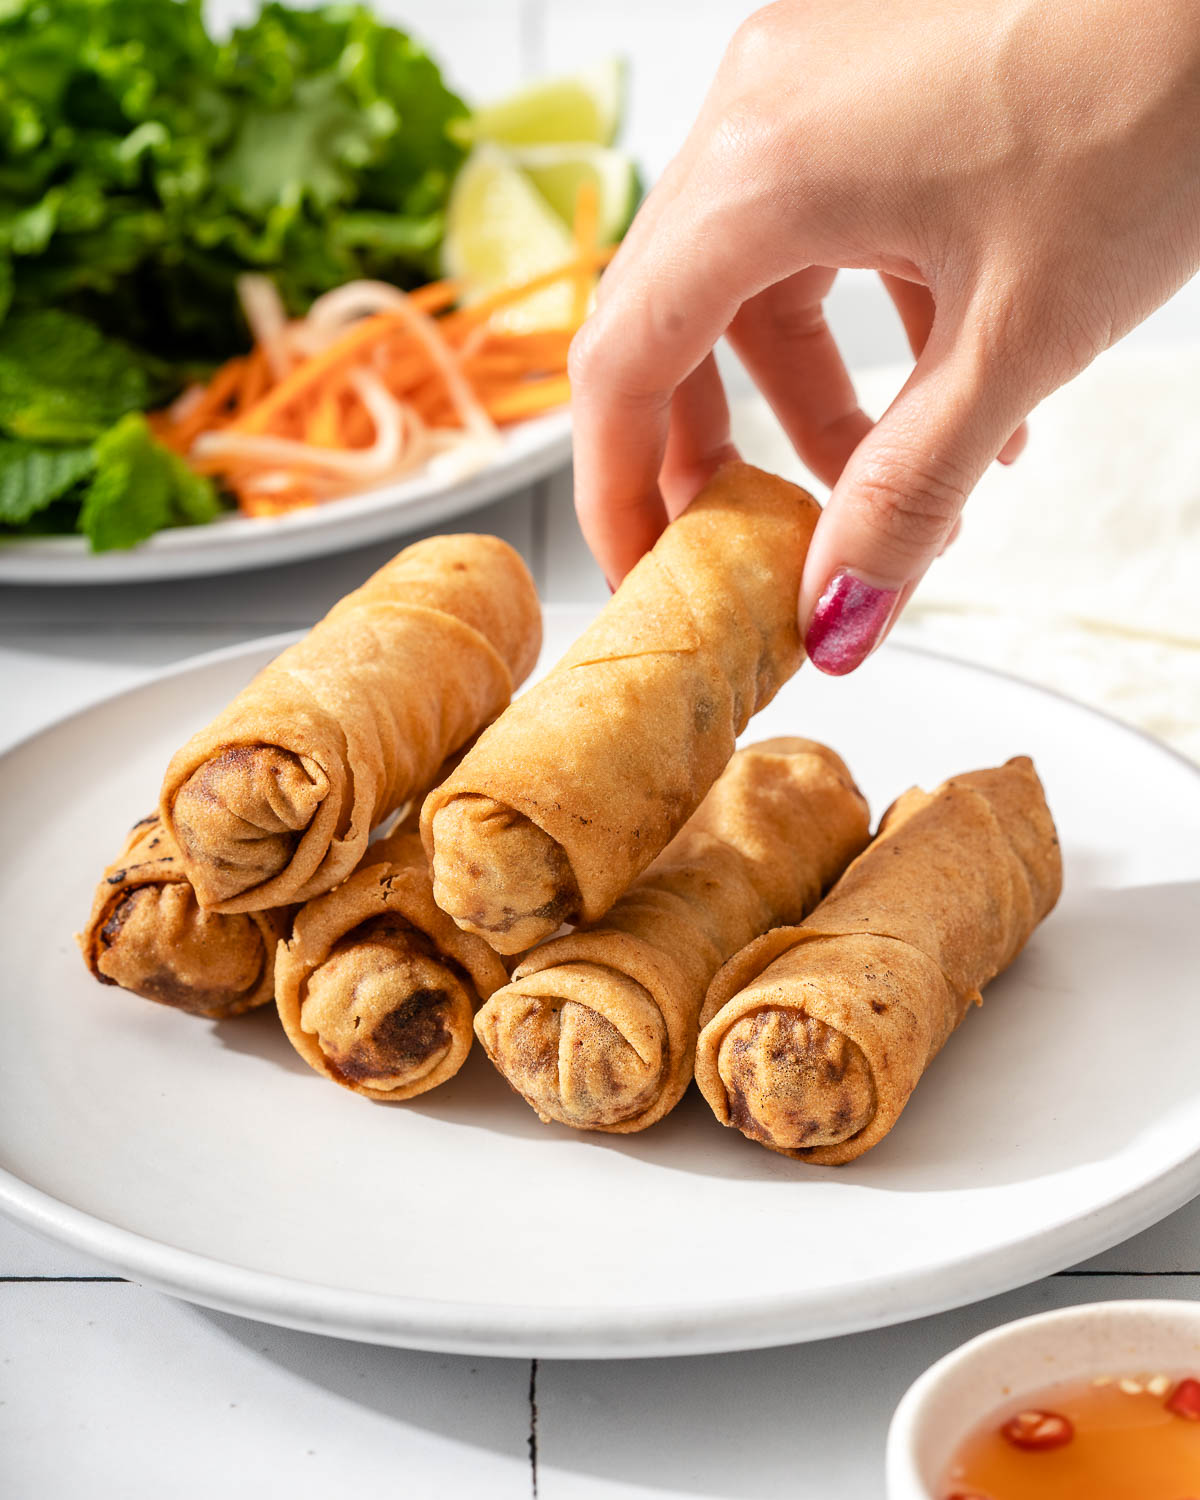 Someone grabbing an egg roll from a plate piled with egg rolls.